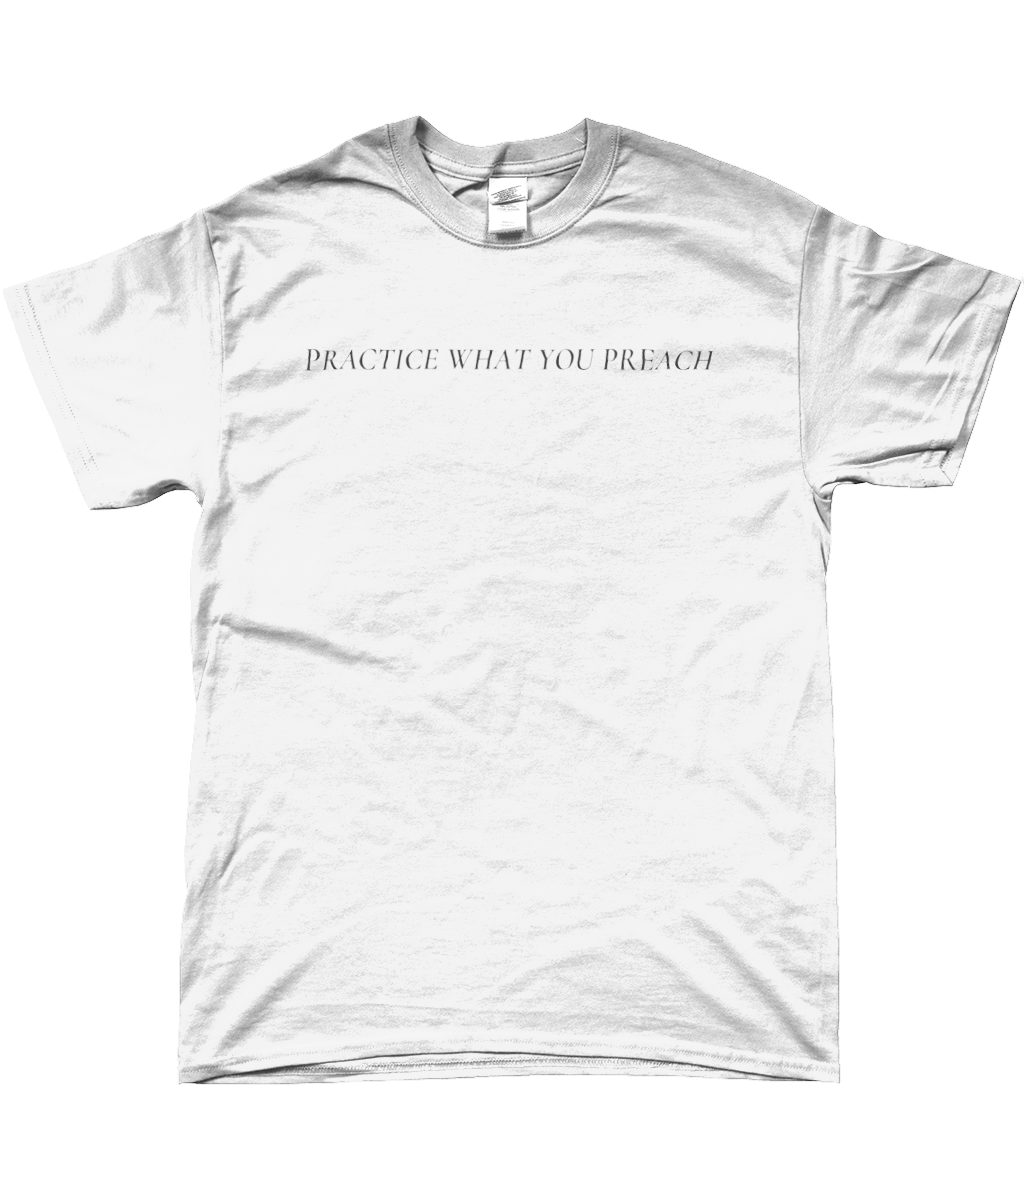 PRACTICE WHAT YOU PREACH T-SHIRT